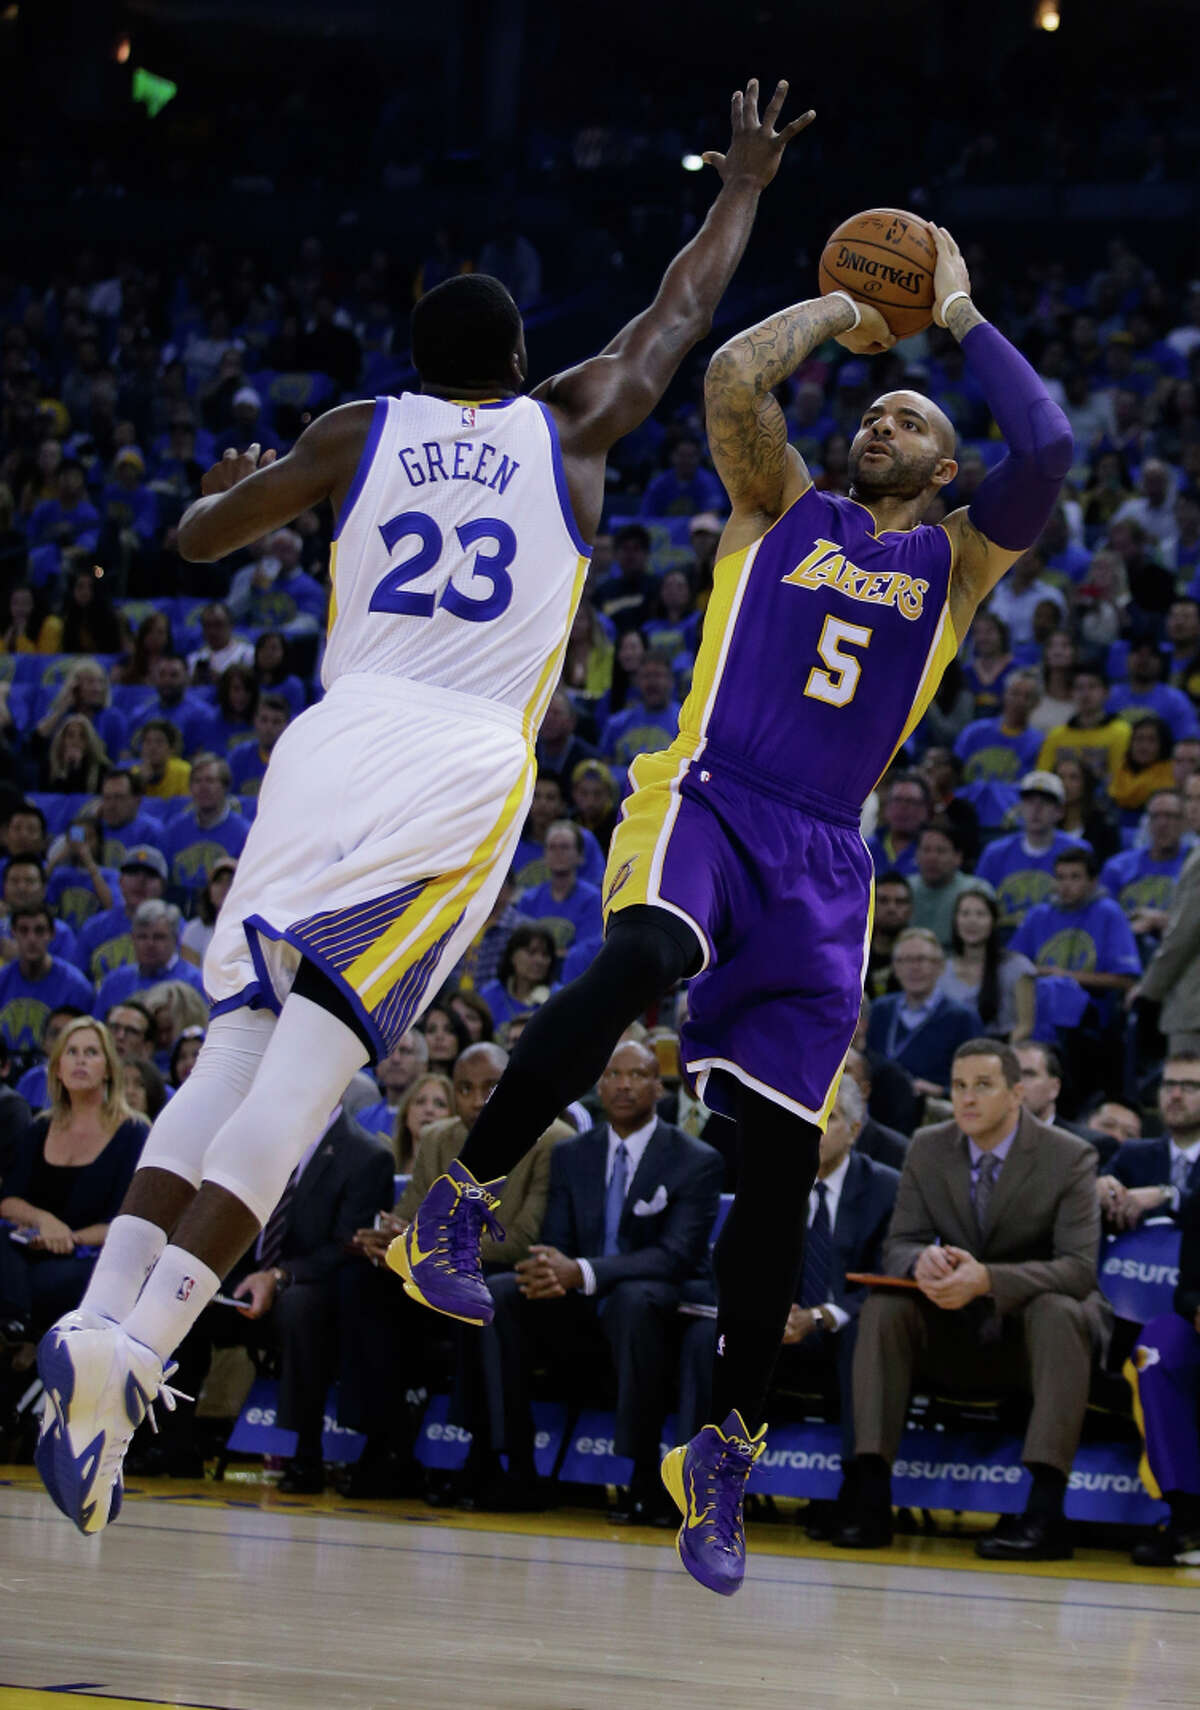 Draymond Green defends against the Lakers’ Carlos Boozer during Saturday’s home opener.